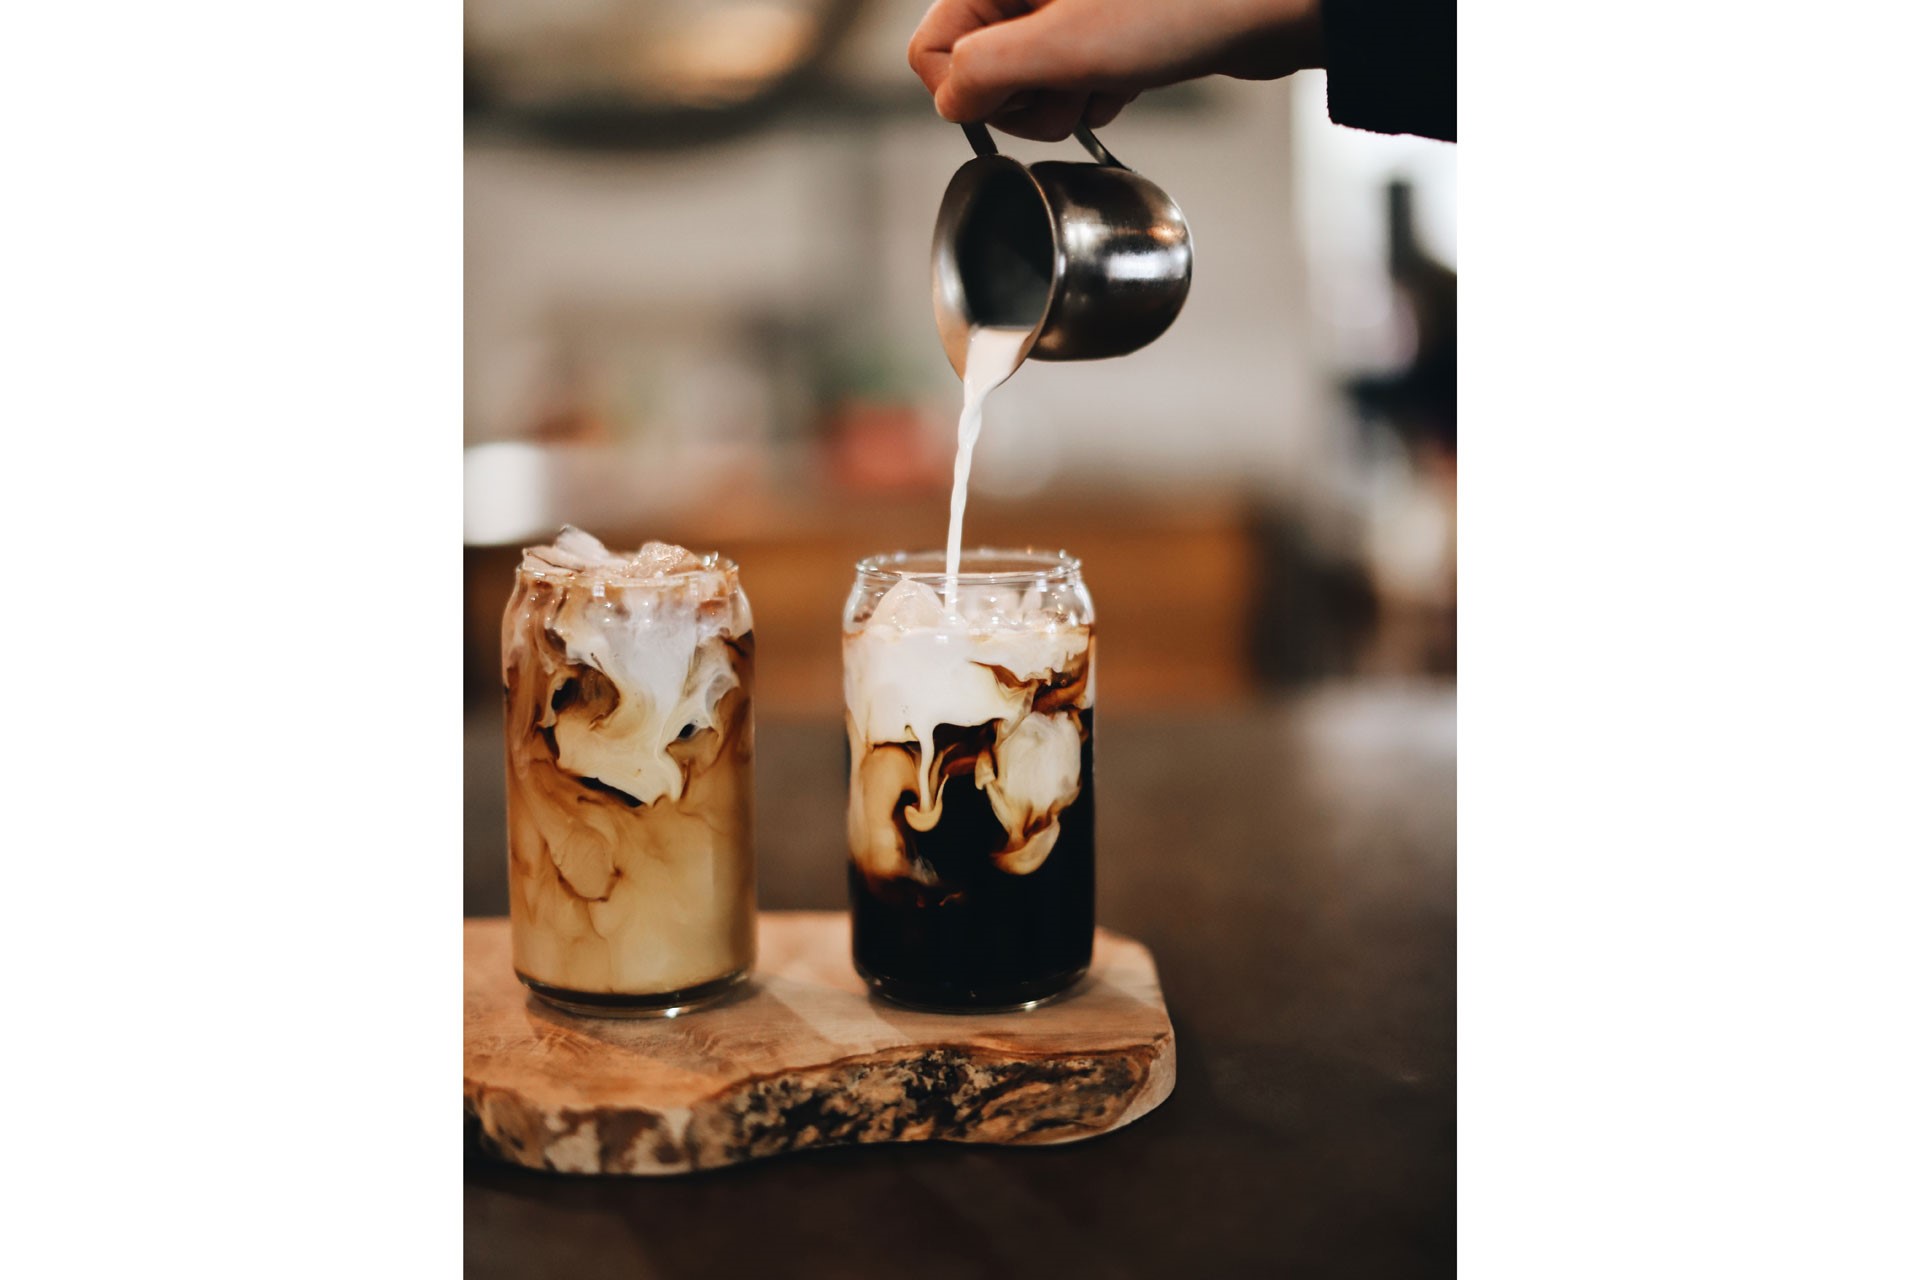 Milk being poured into cold brew coffee